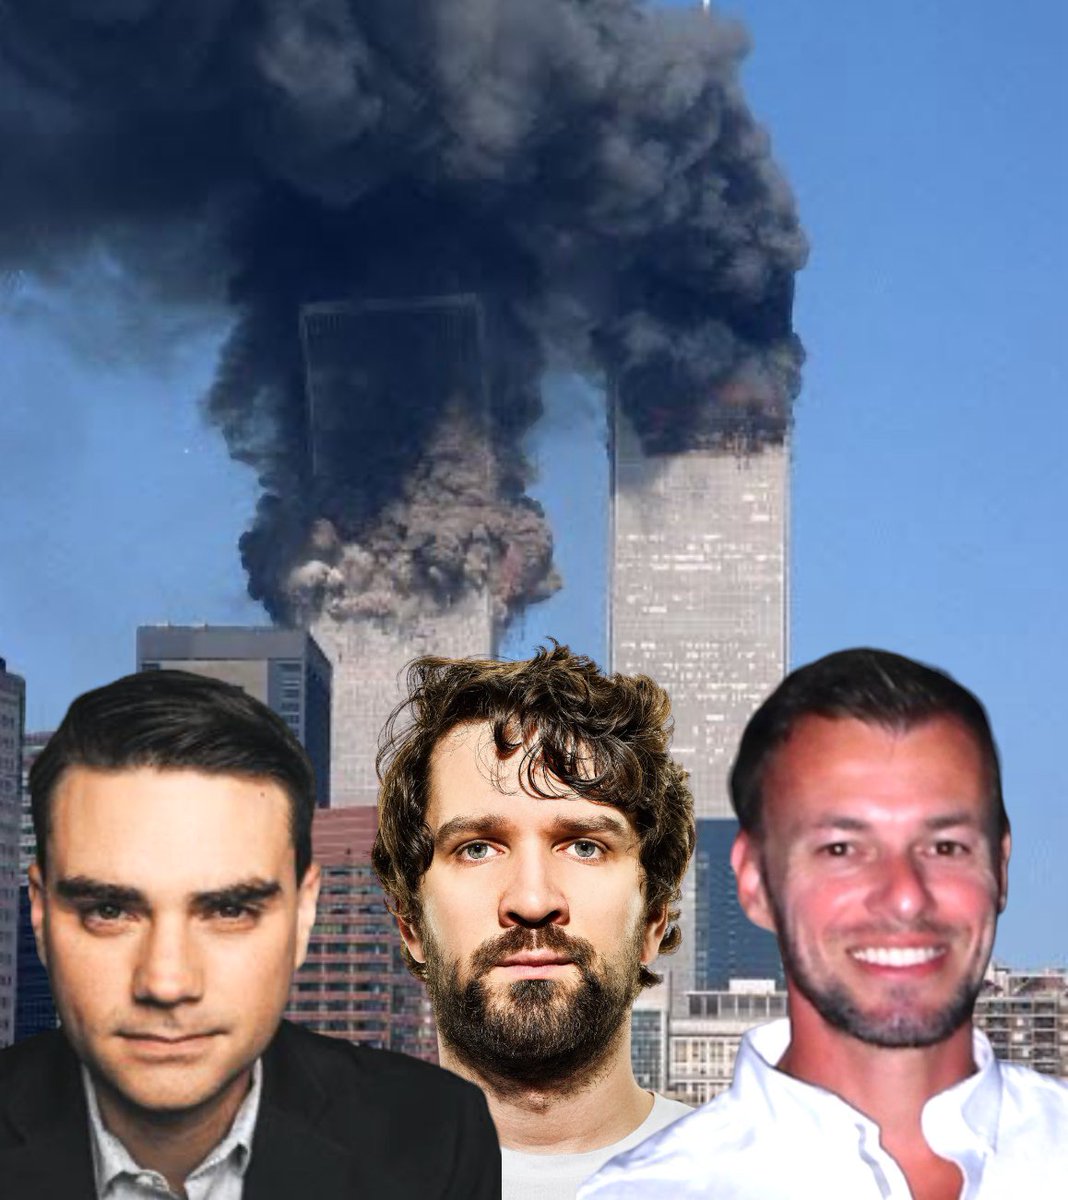 [RG911Team] People like @benshapiro, @TheOmniLiberal, and @krassenstein have debated Covid, Jan 6, Gaza, Ukraine and other controversial issues. But will any of them dare to debate us on 9/11 - the most off-limits subject in legacy media? We are up for the challenge - are they?